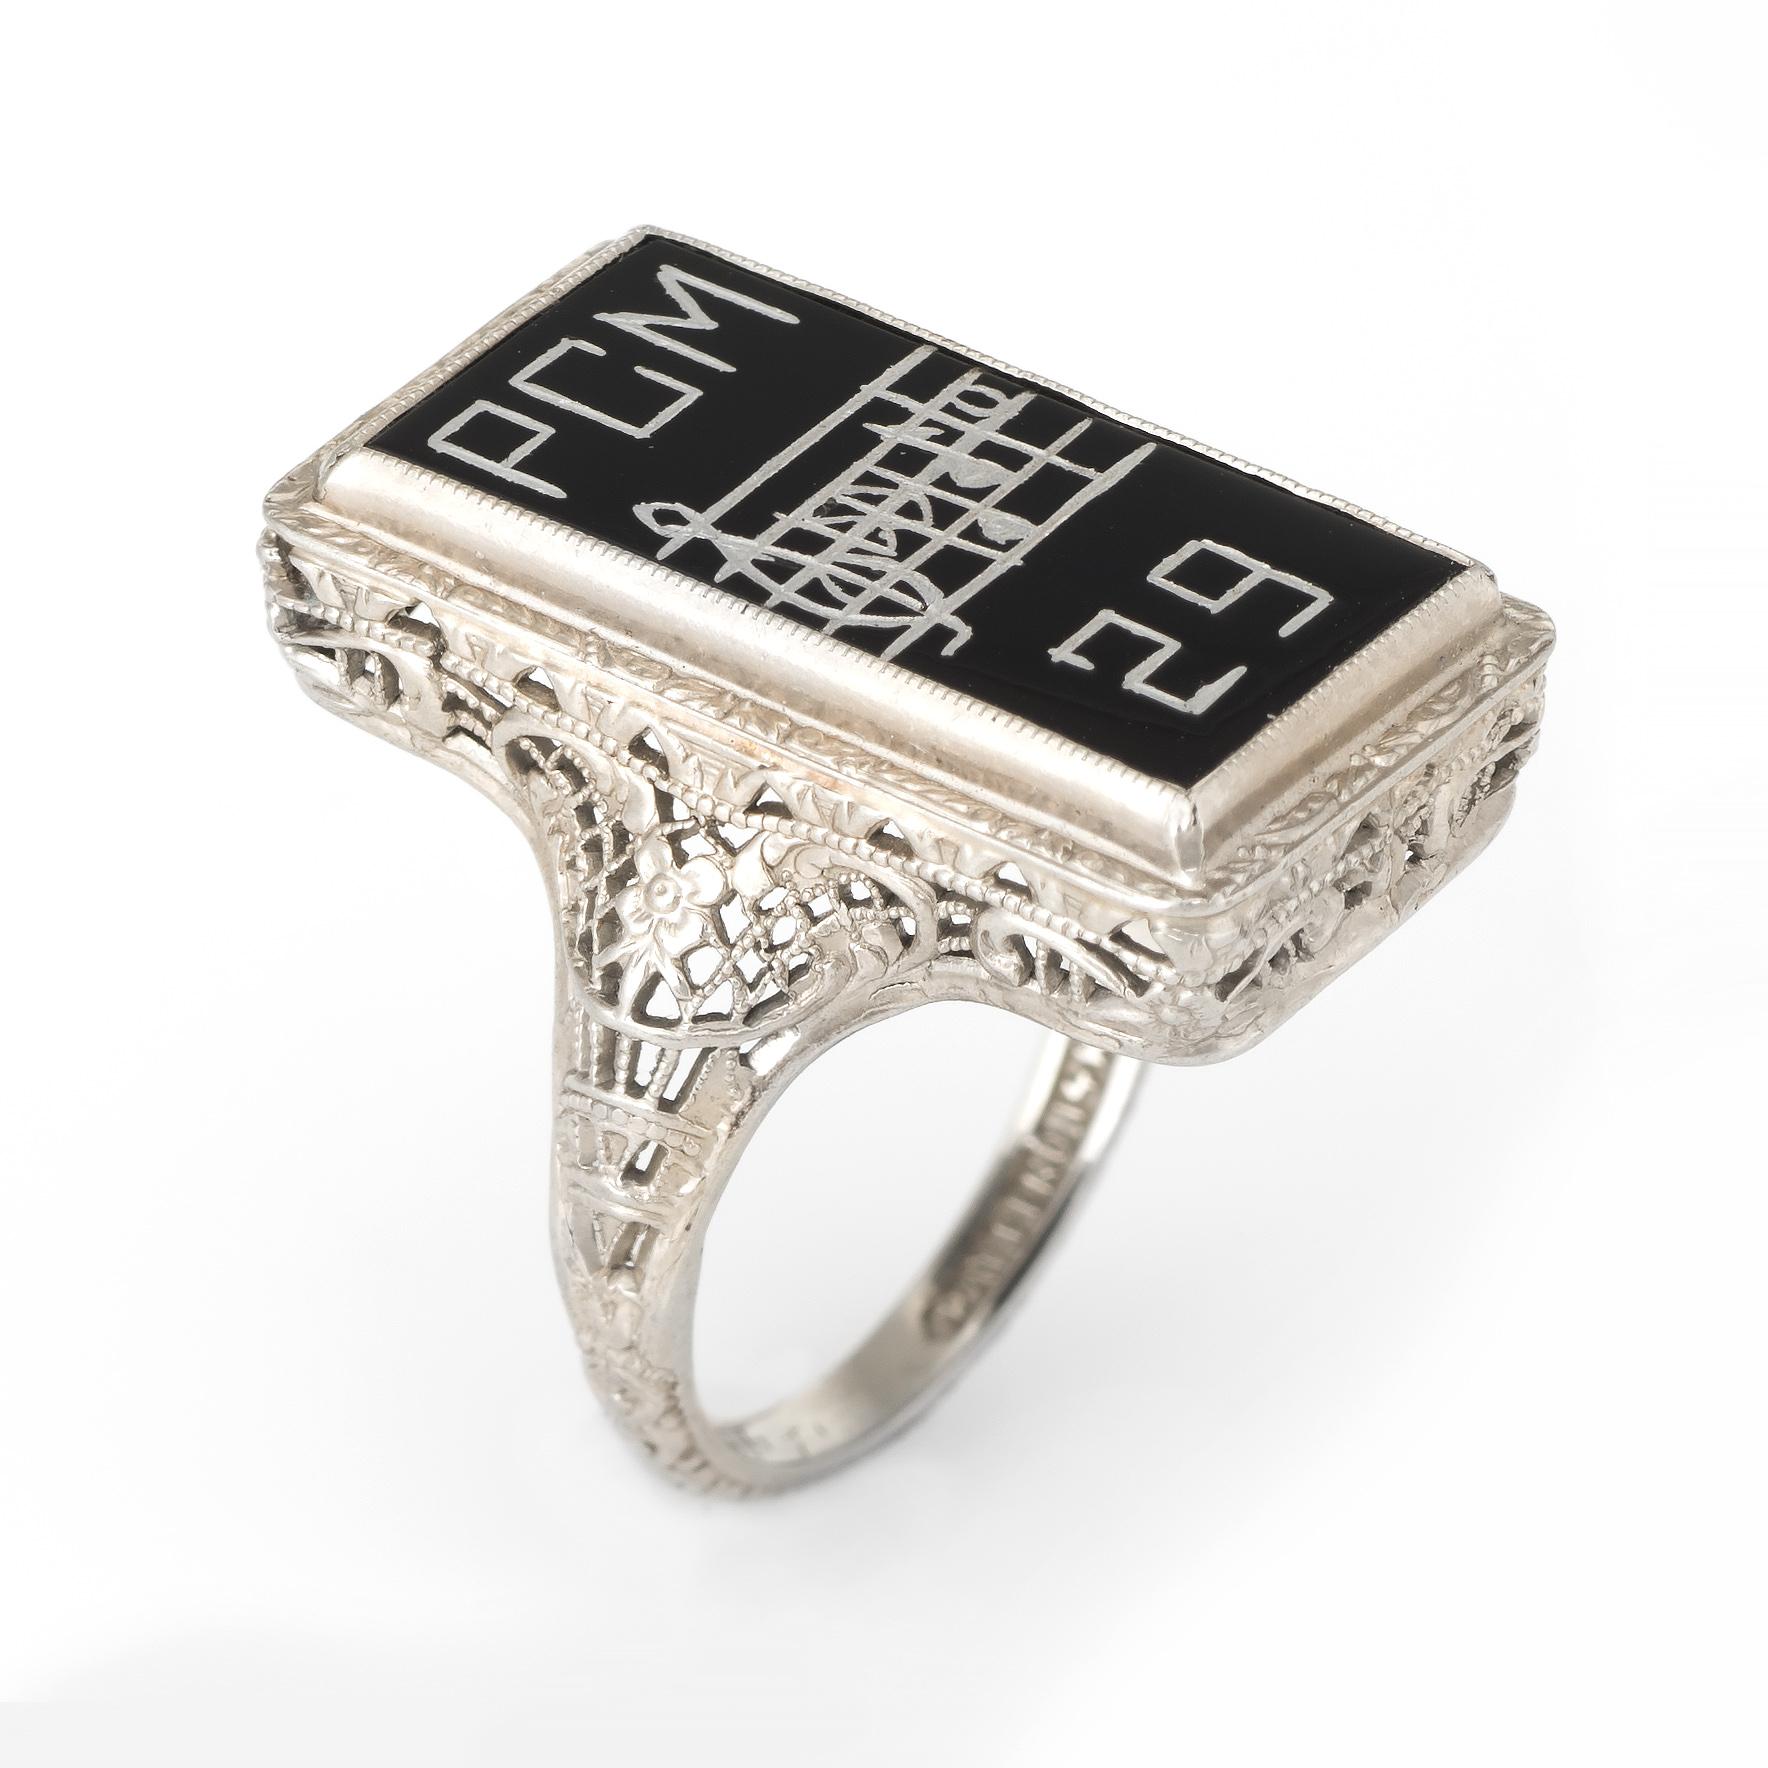 Finely detailed vintage Art Deco era ring (circa 1920s), crafted in 14 karat white gold. 

Onyx is inscribed 'PCM' along with a music sheet and the year '29'   

Lacy filigree mount with embossed floral detail, a hallmark of the Art Deco era.  

The